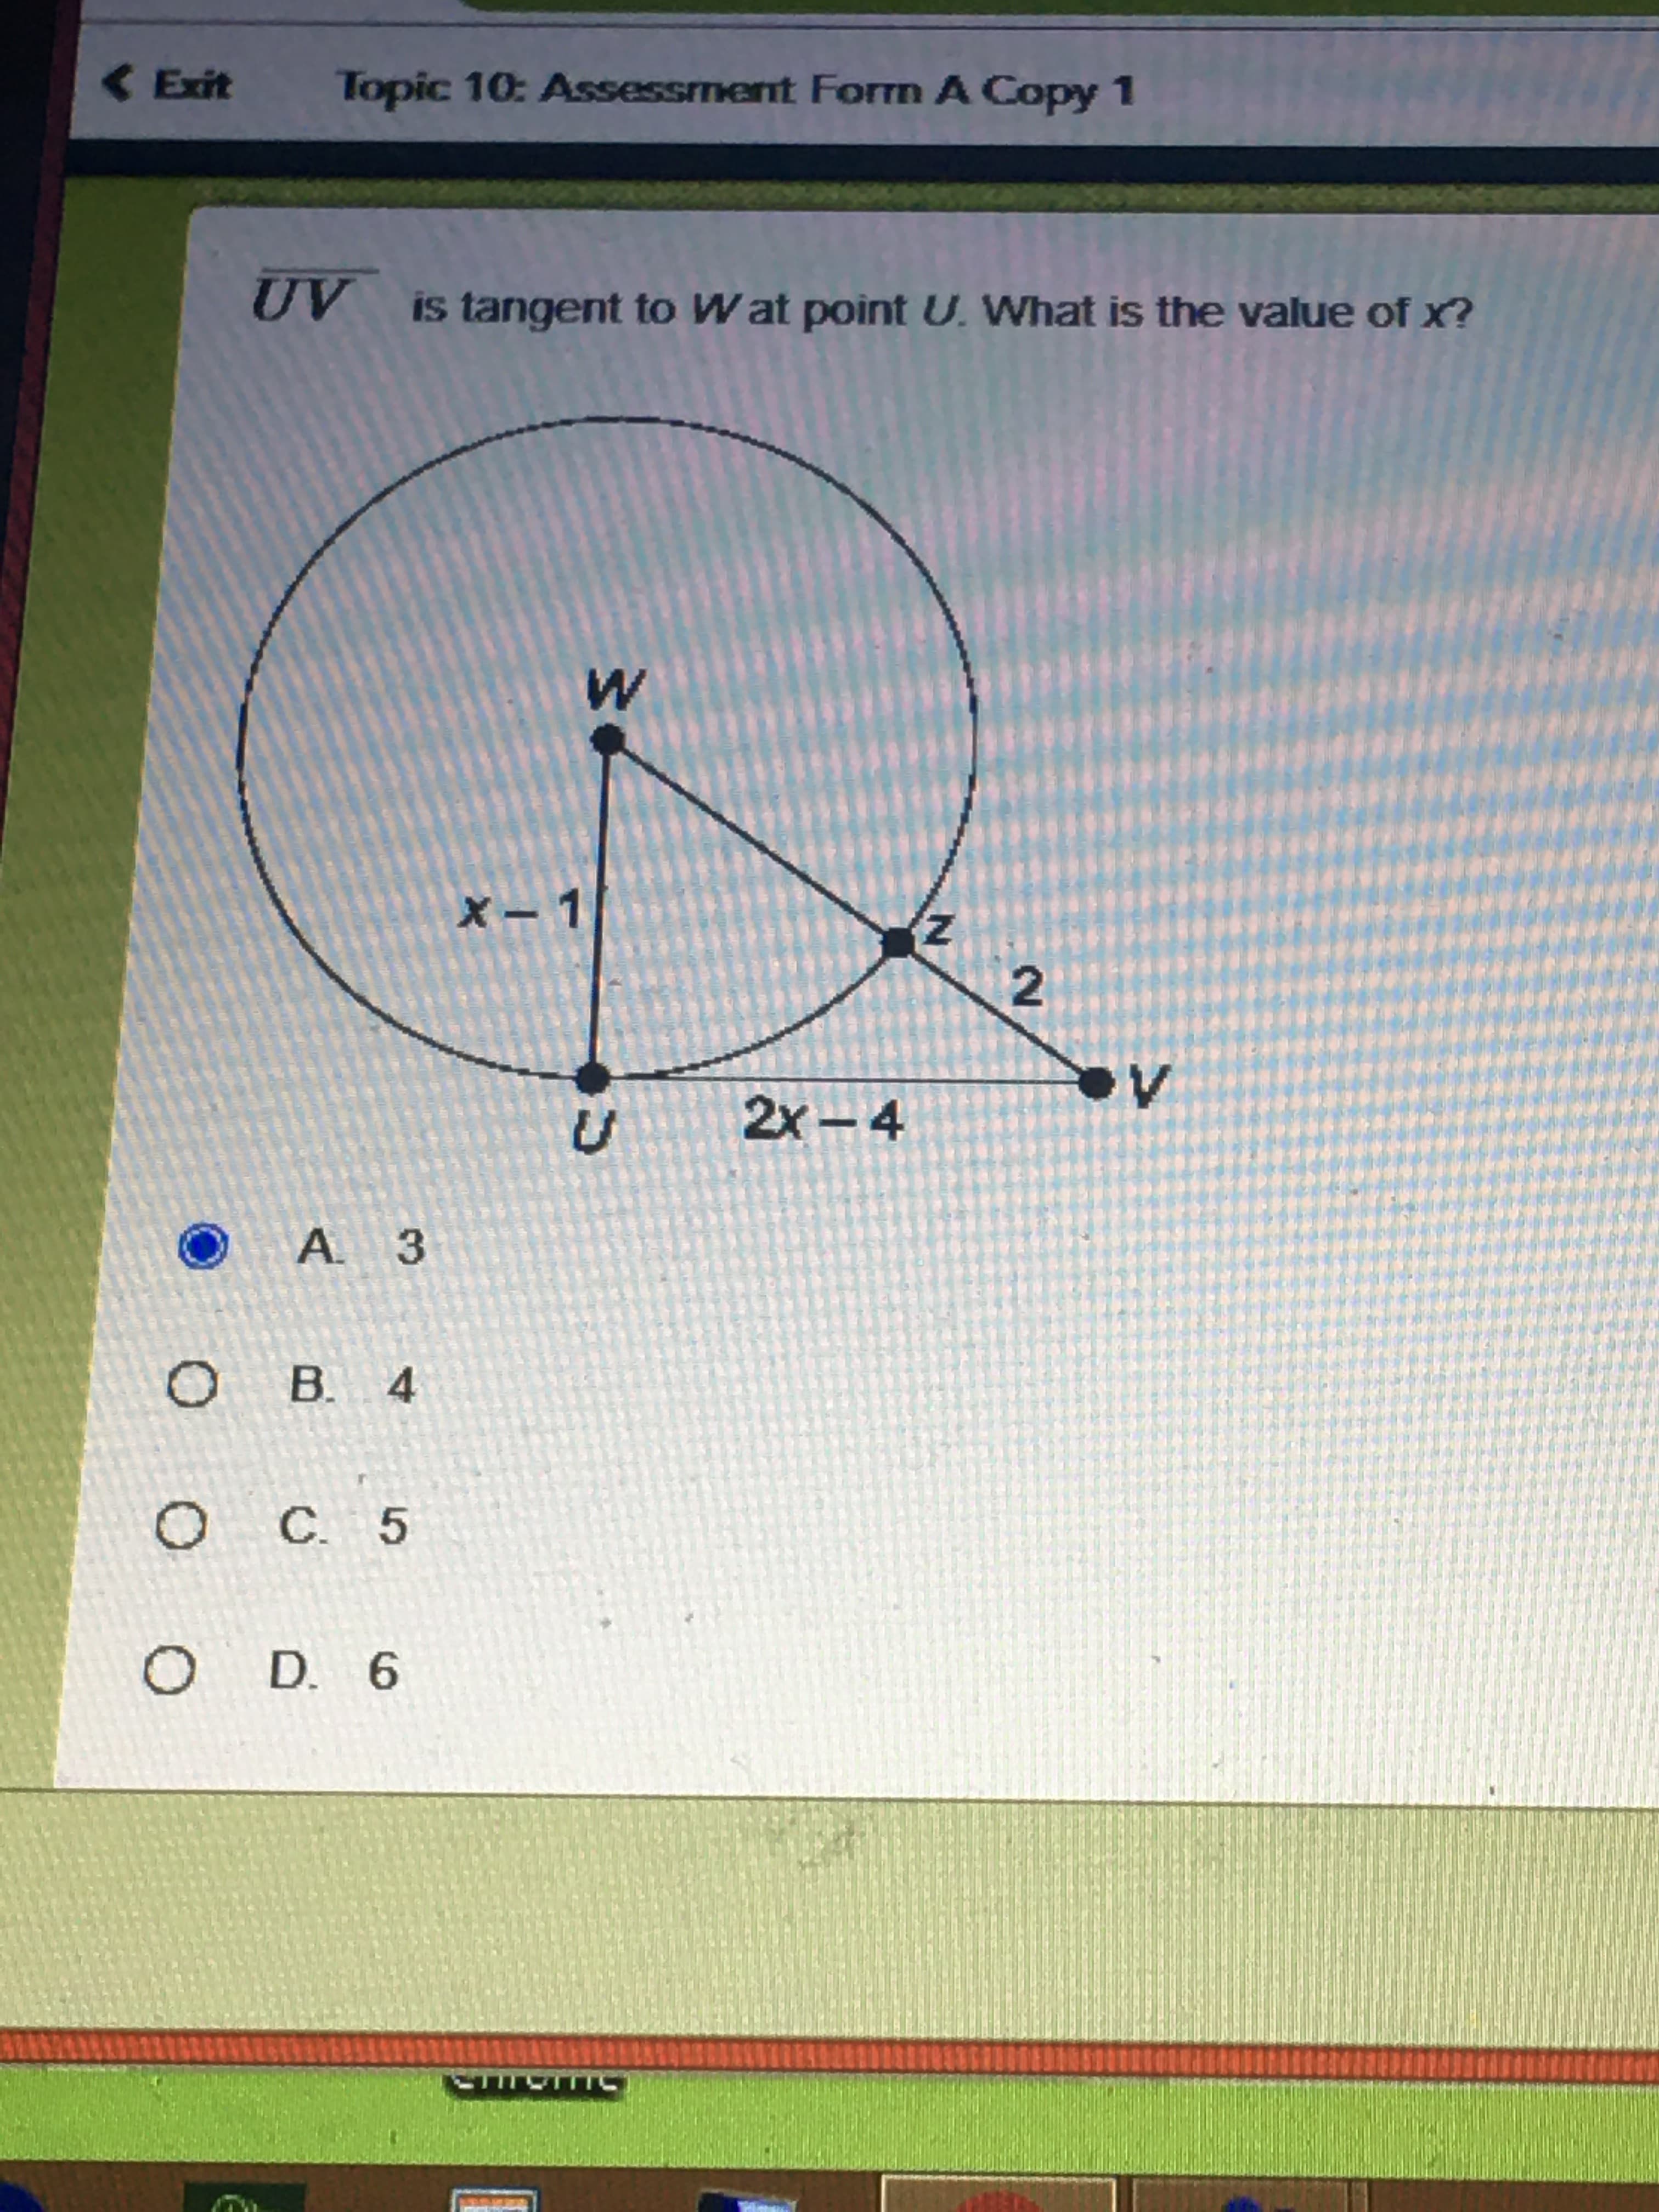 UV is tangent to Wat point U. What is the value of x?
X - 1
2x-4
2.
